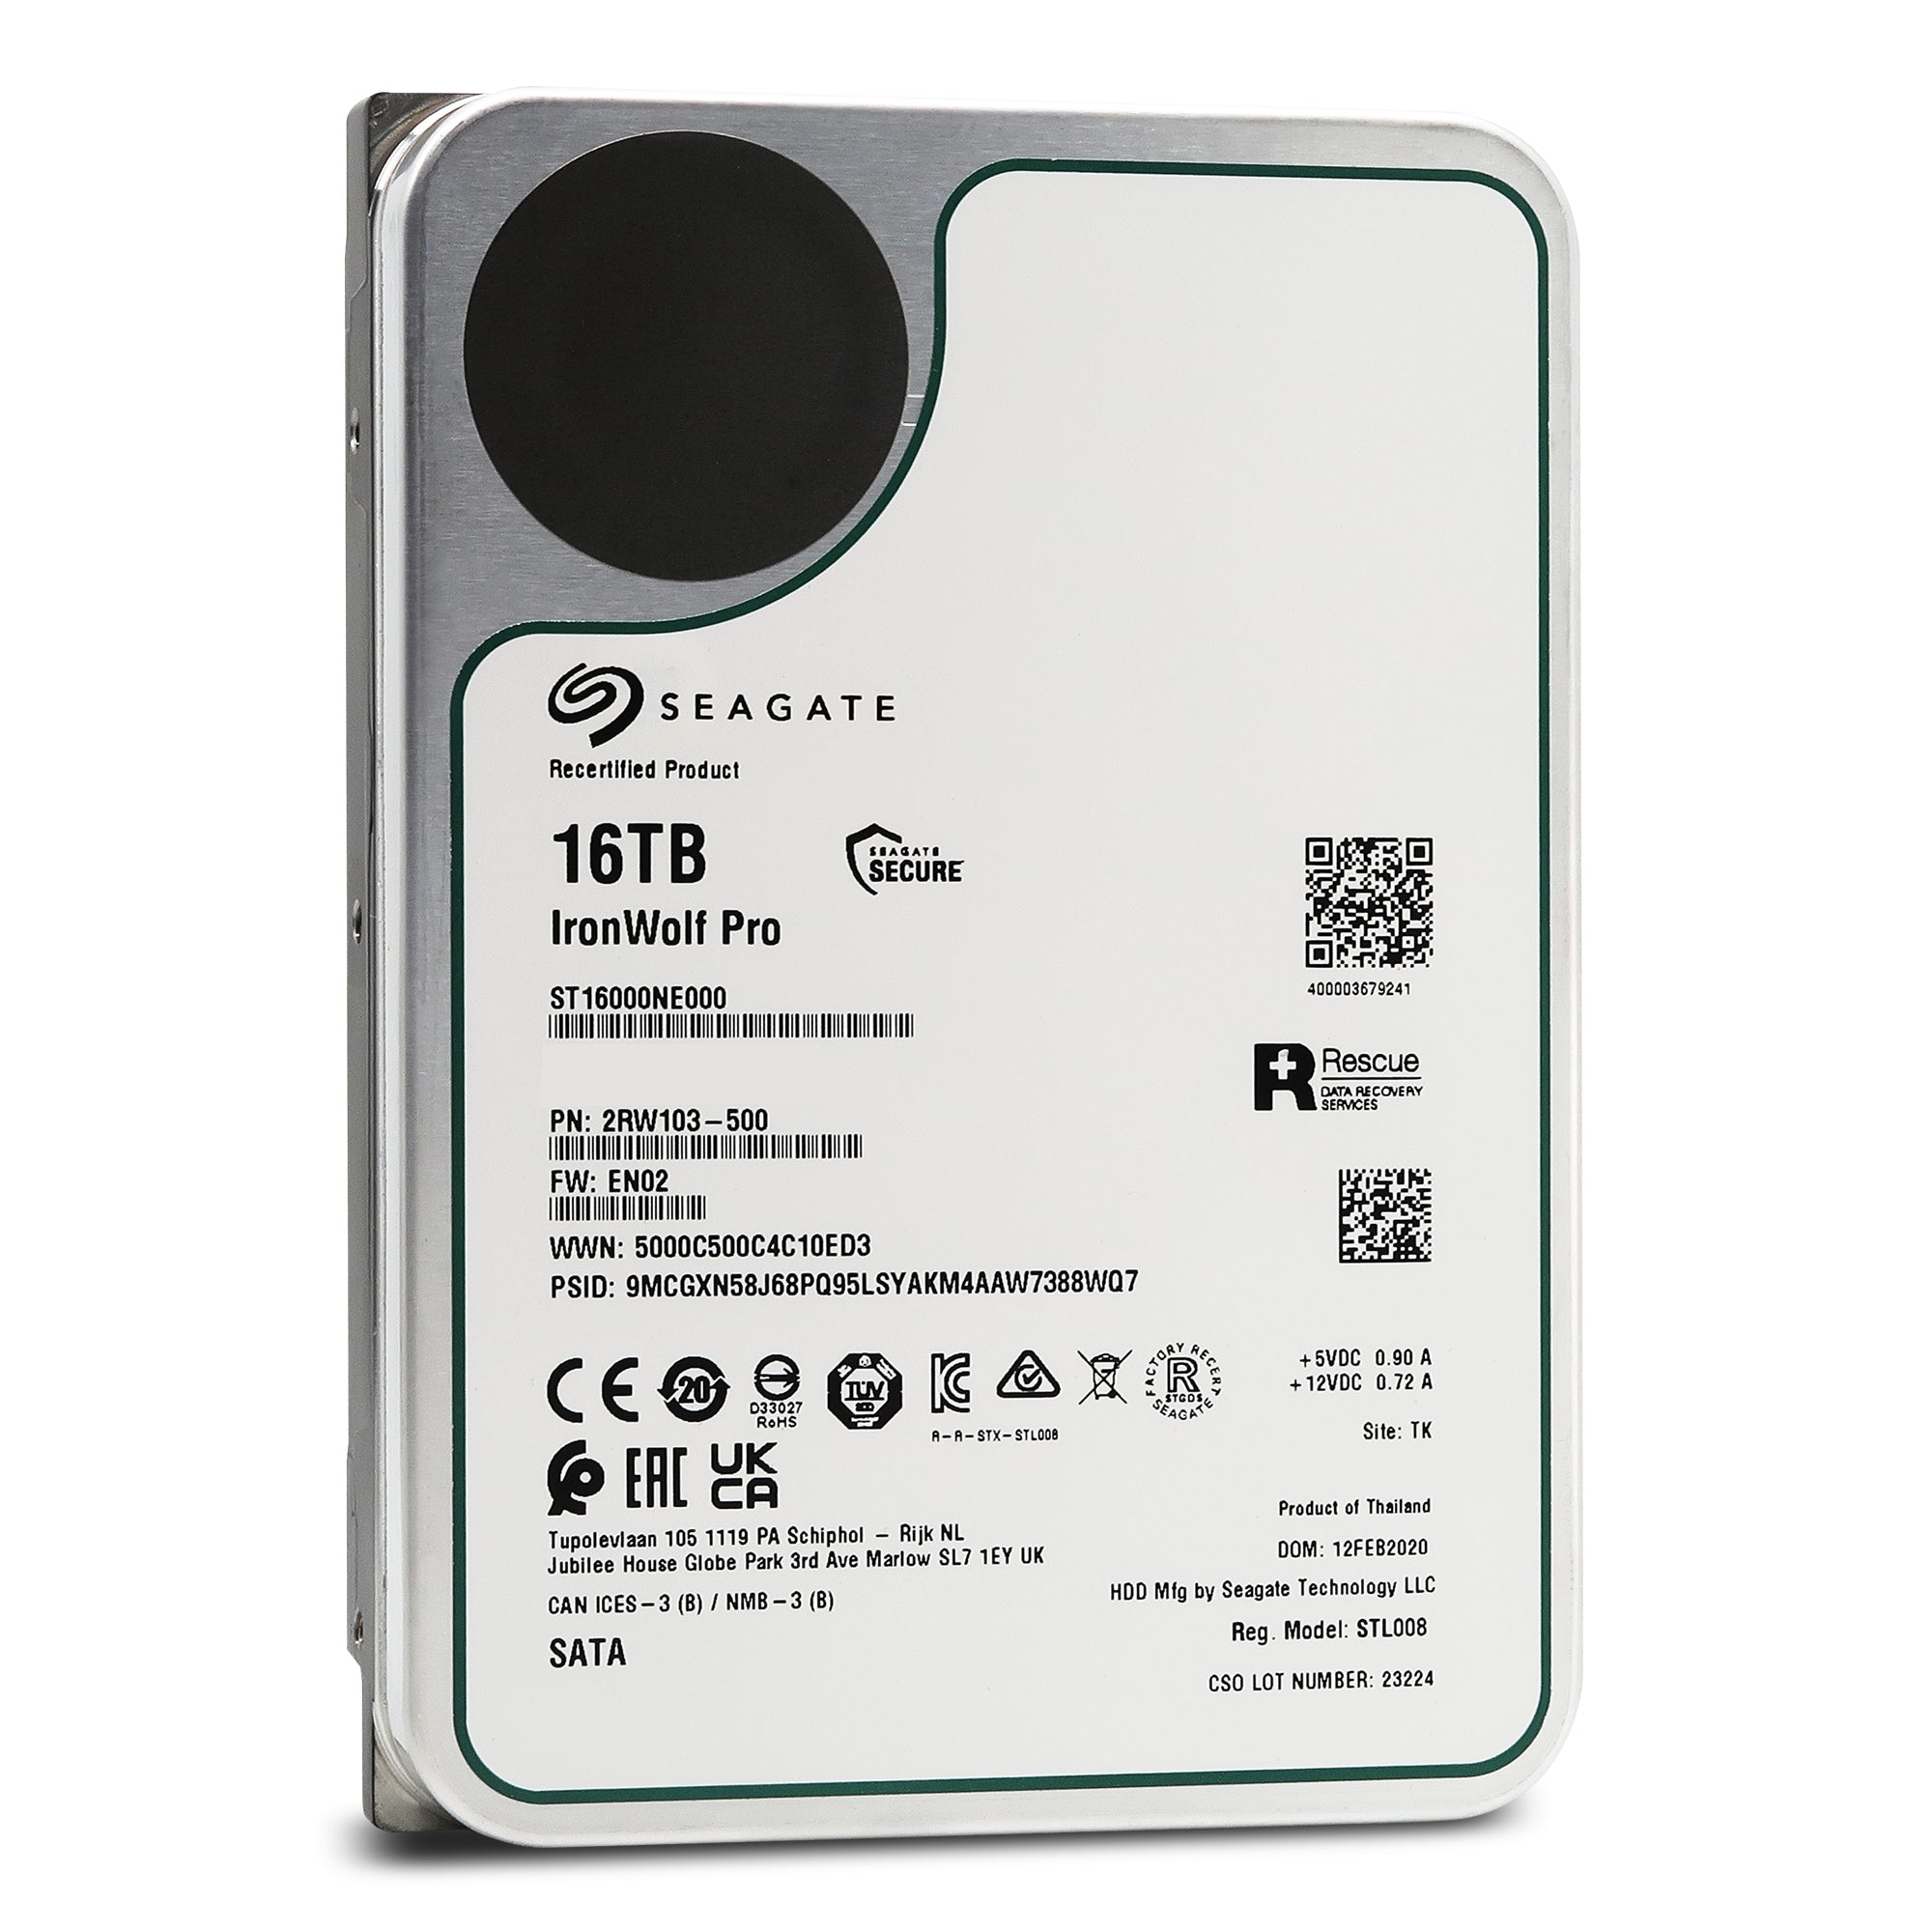 Seagate IronWolf Pro ST16000NE000 16TB 7.2K RPM SATA 6Gb/s 512e 3.5in Recertified Hard Drive Front View